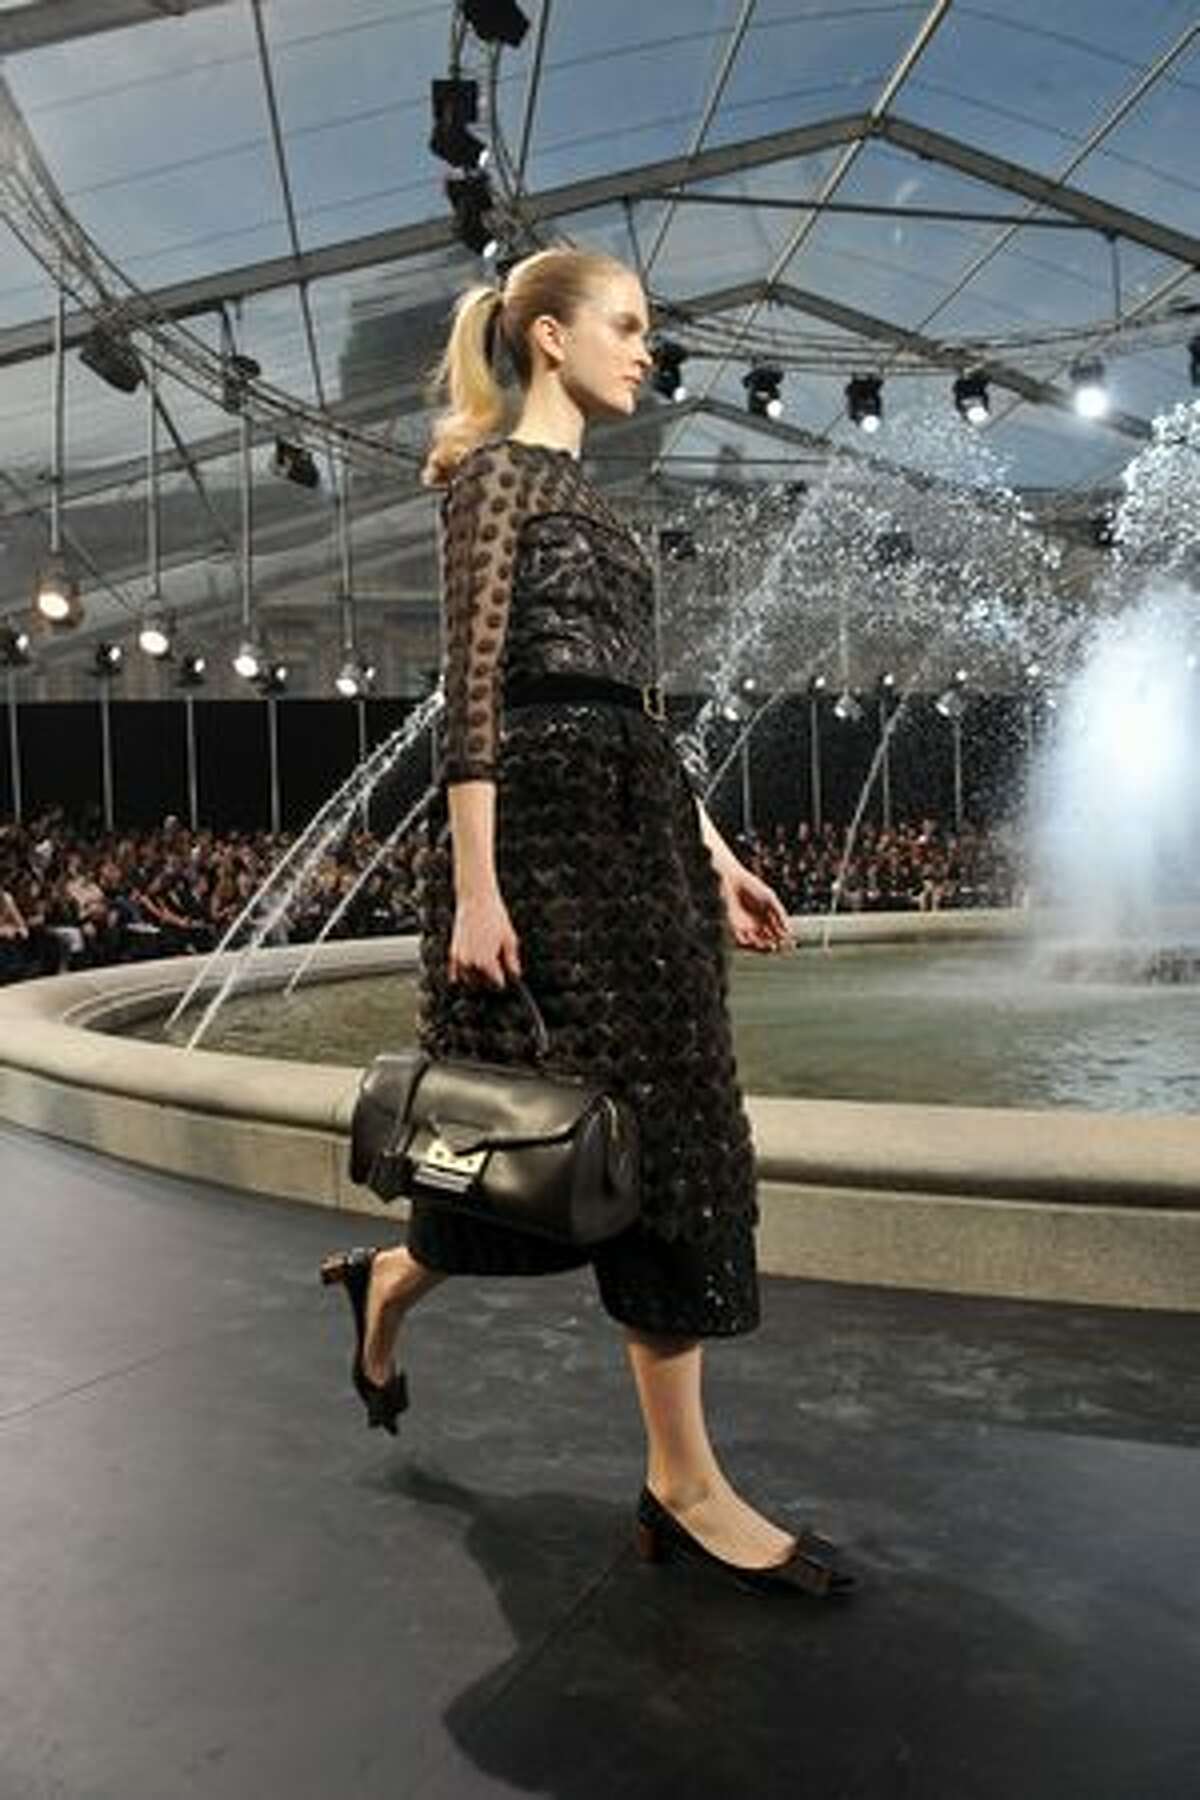 A model walks the runway during the Vuitton Ready to Wear Fall